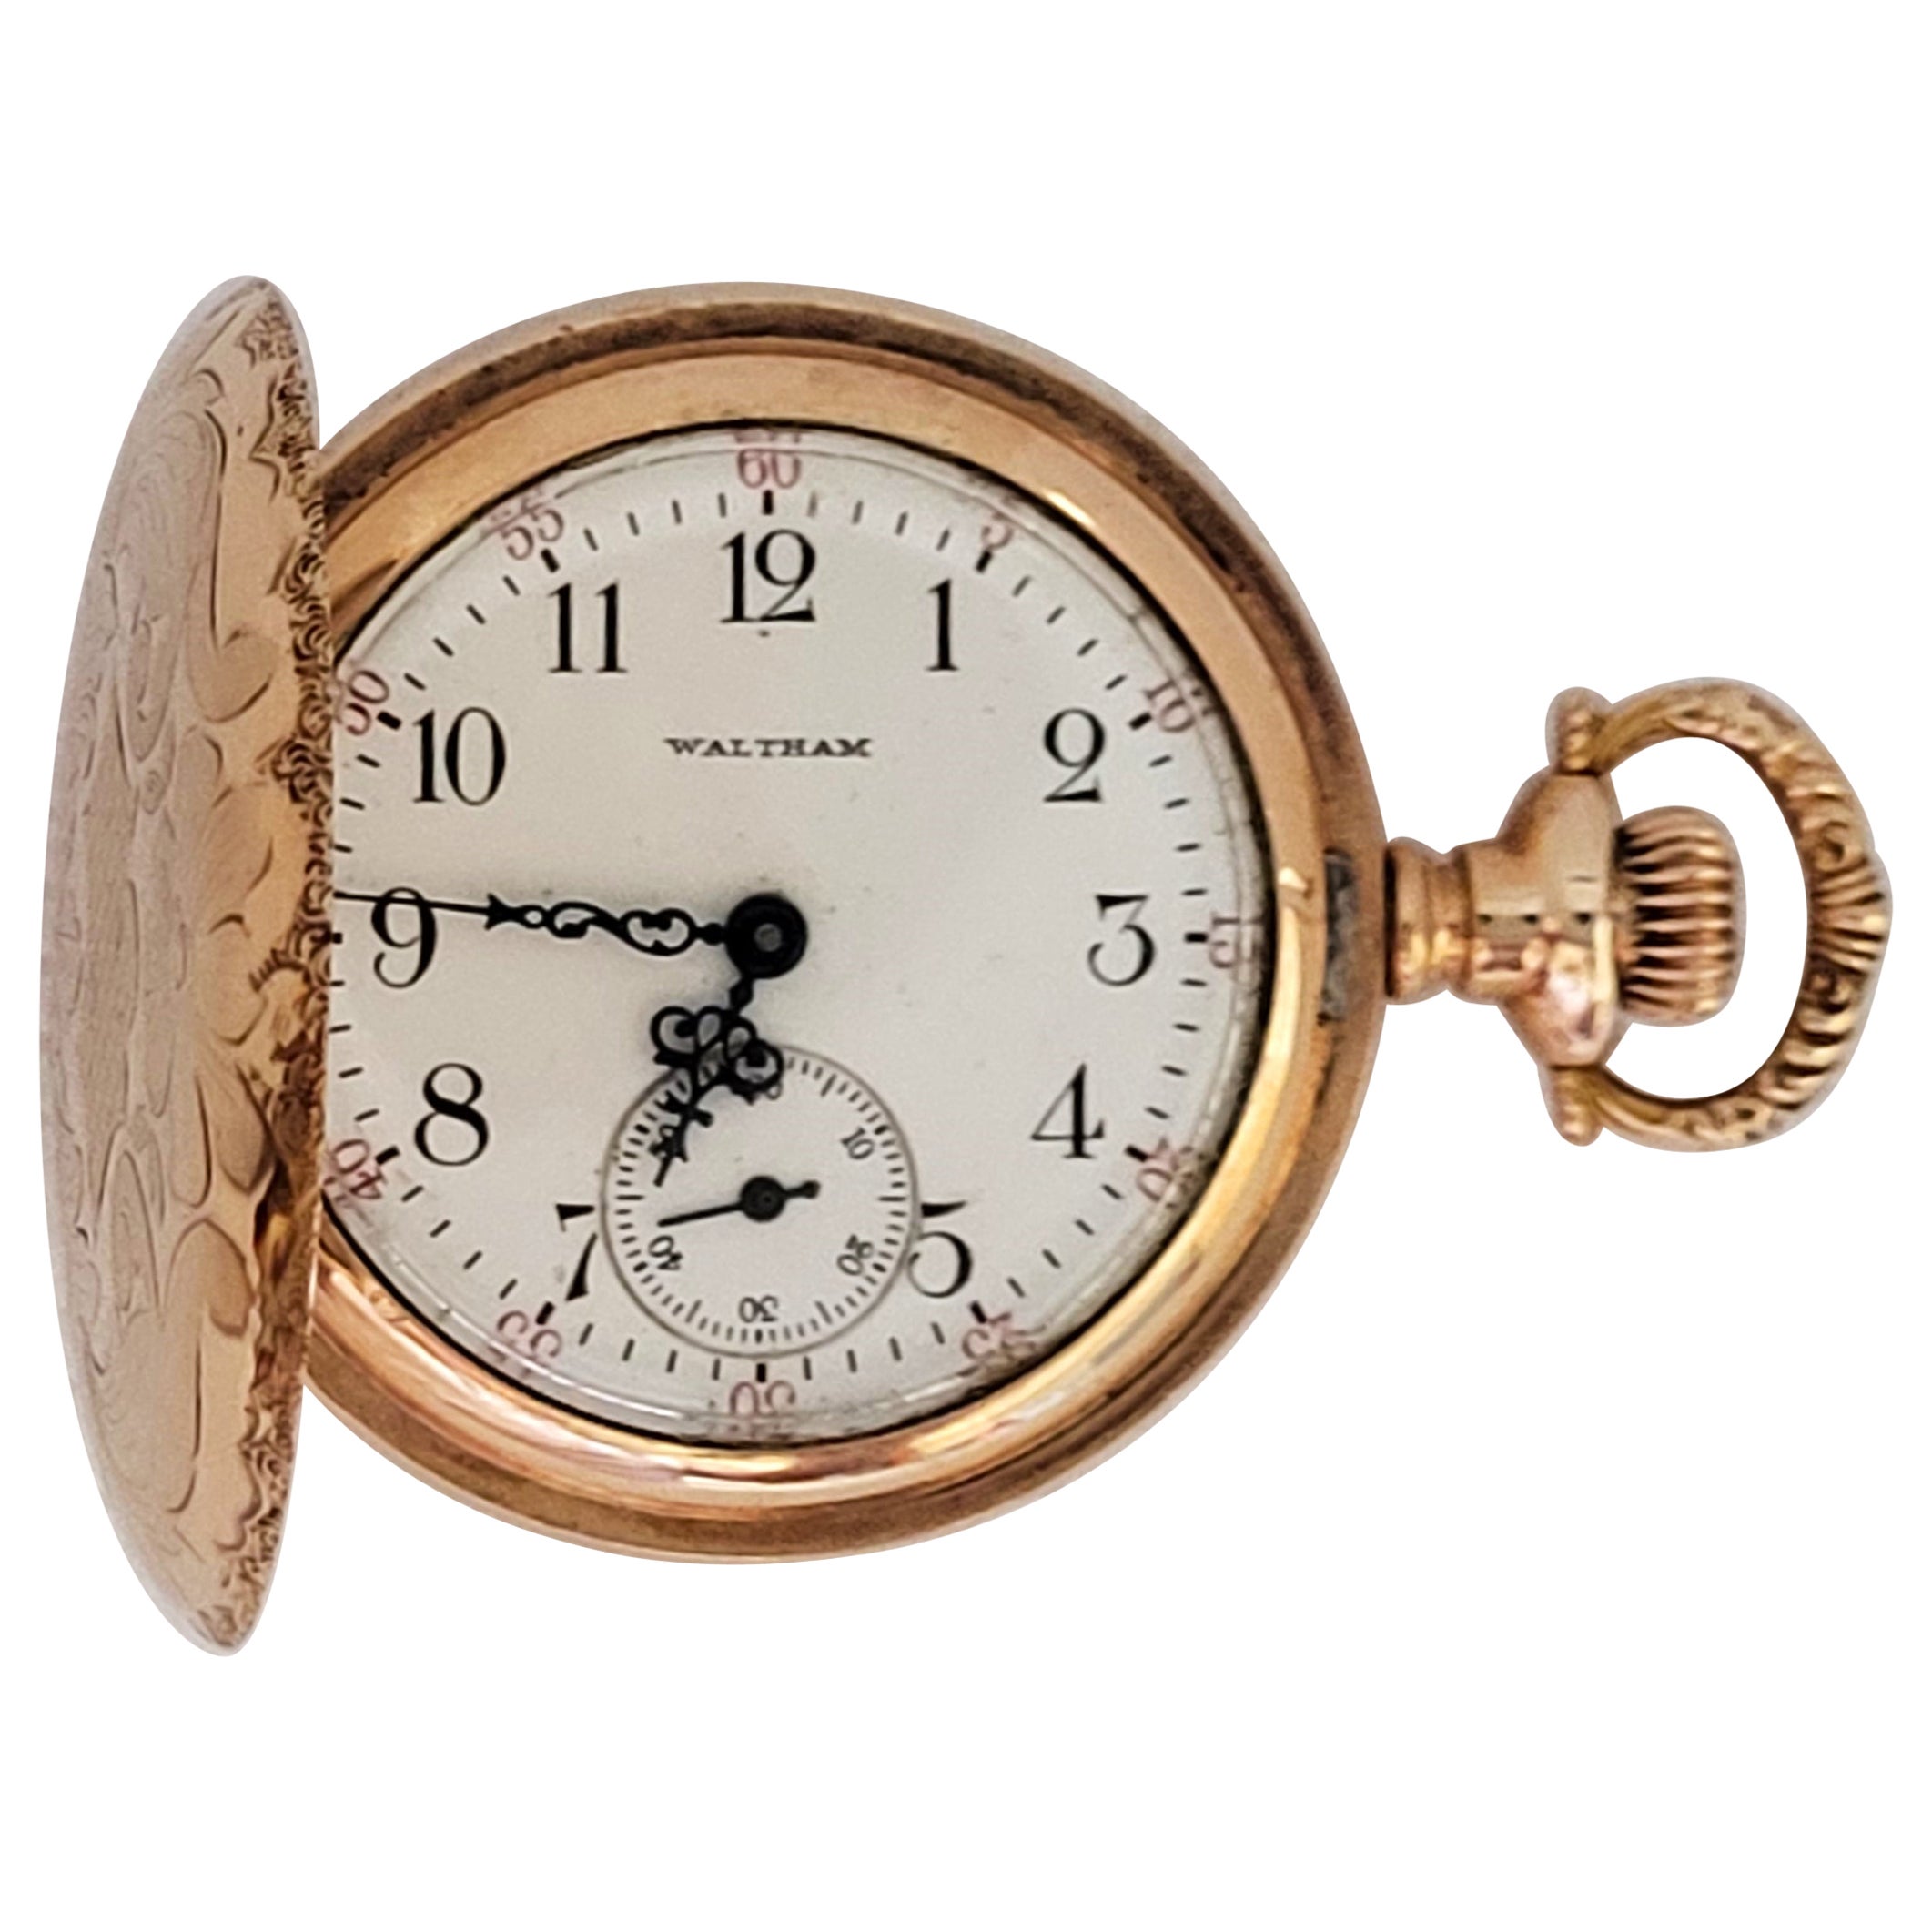 Waltham Pocket Watch Gold Plated Working #16360616 15 Jewels Os Size For Sale